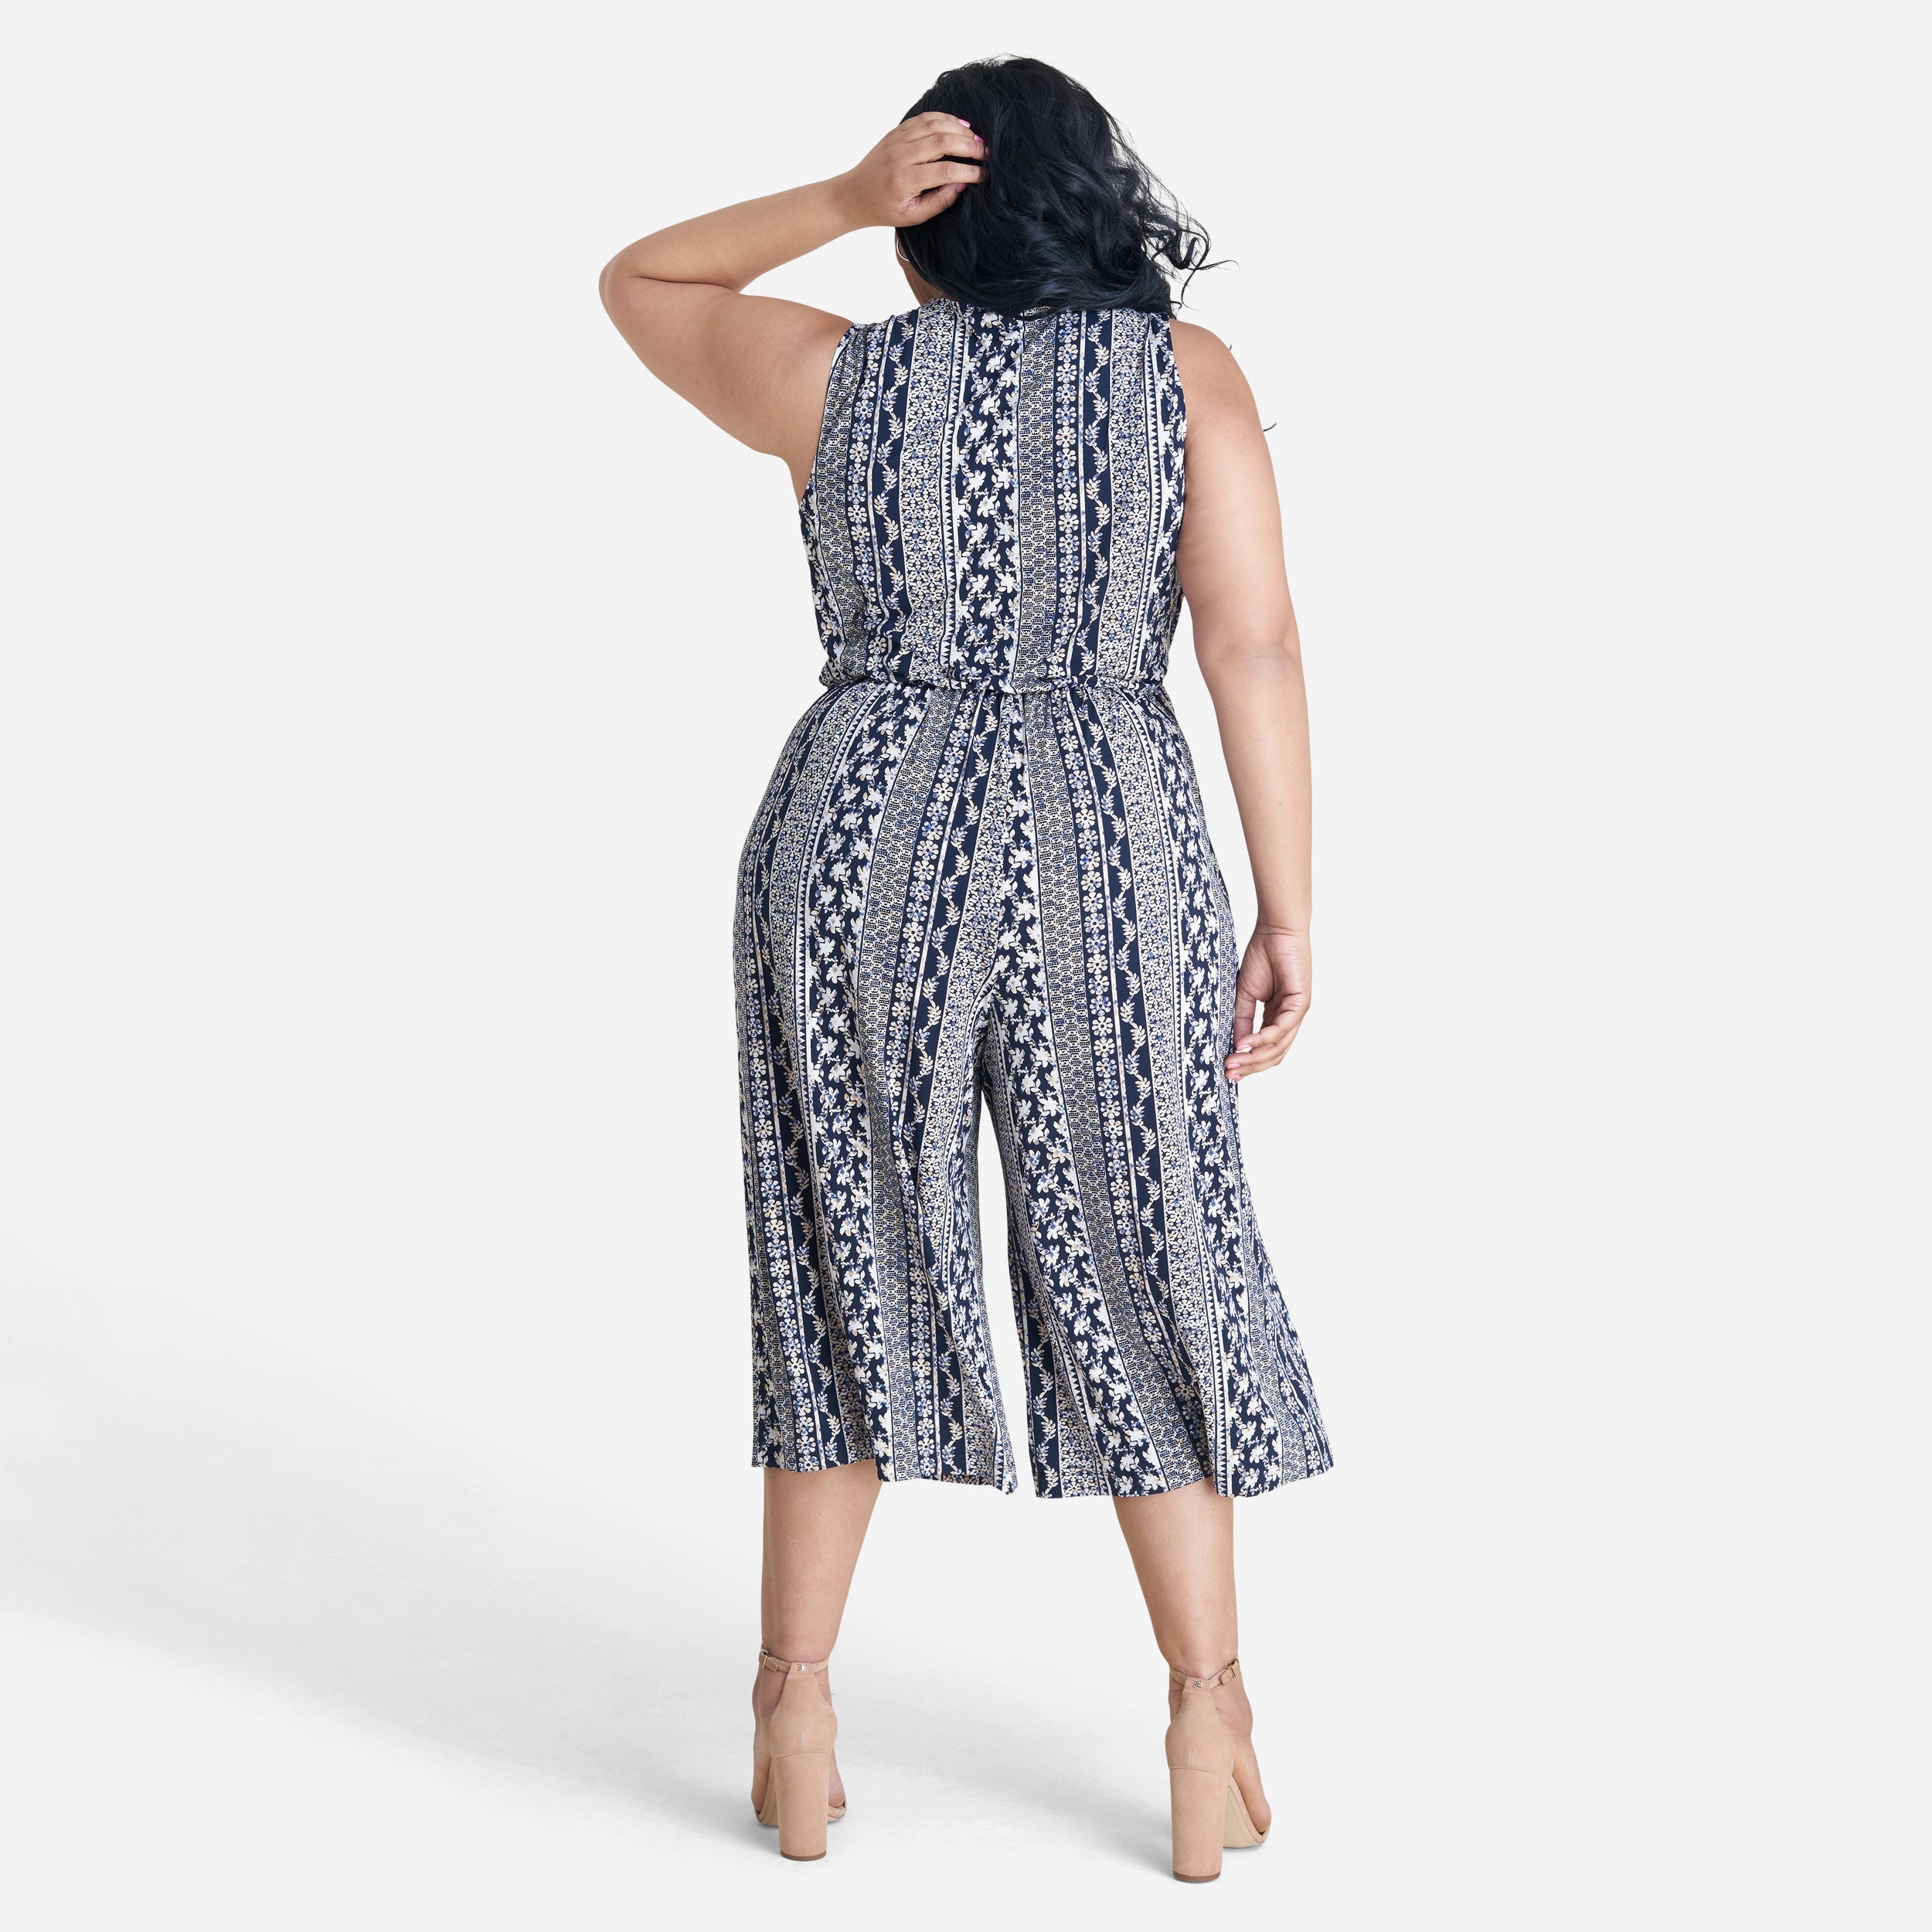 Woman posing wearing Navy/Maize Morgan Cropped Jumpsuit from Connected Apparel